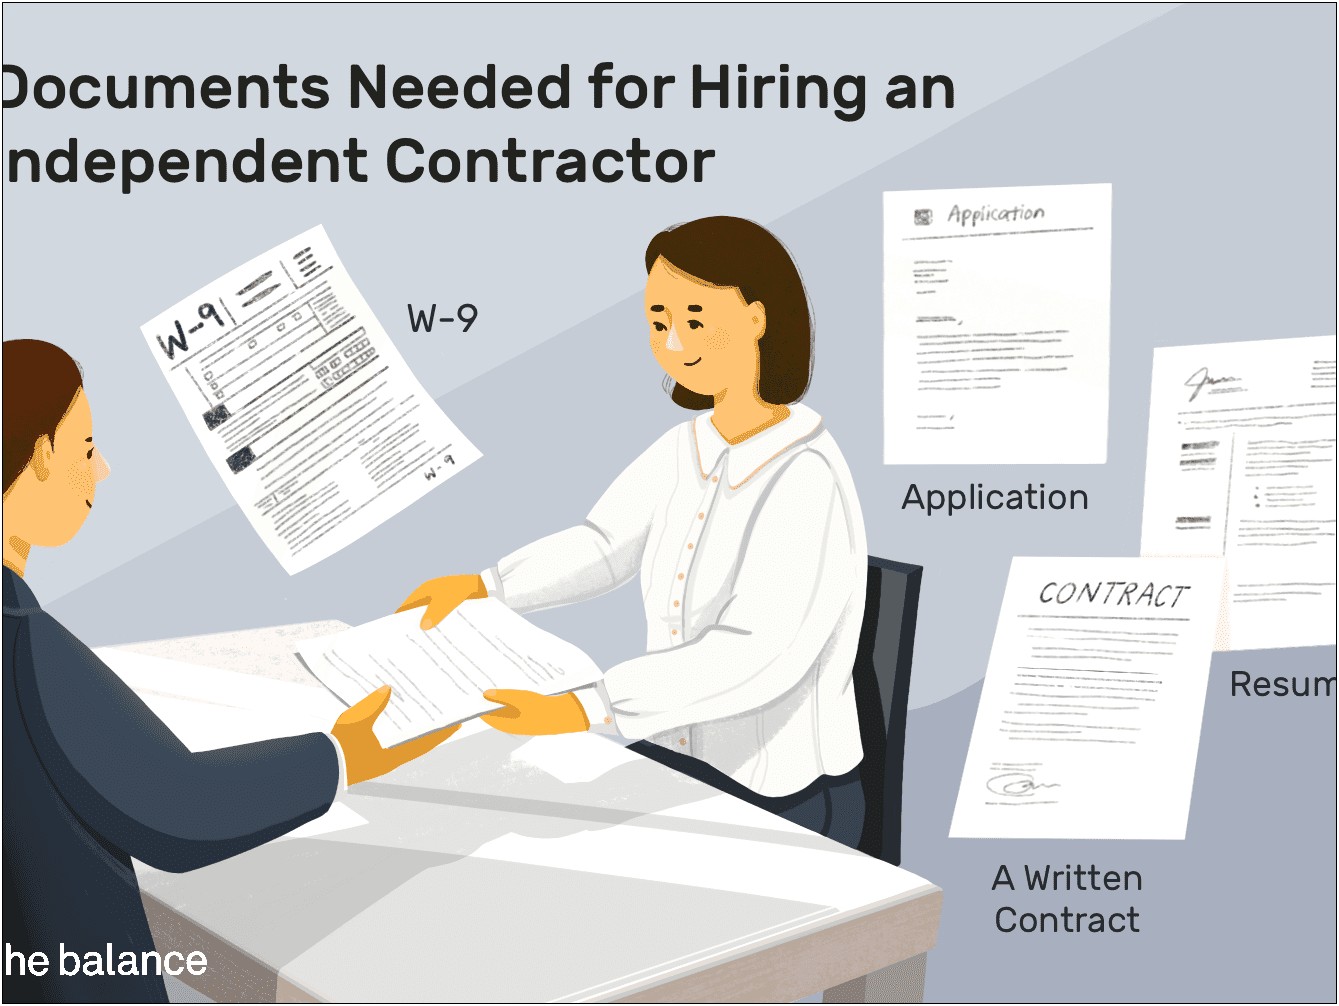 Should I List Subcontractor Experience On My Resume